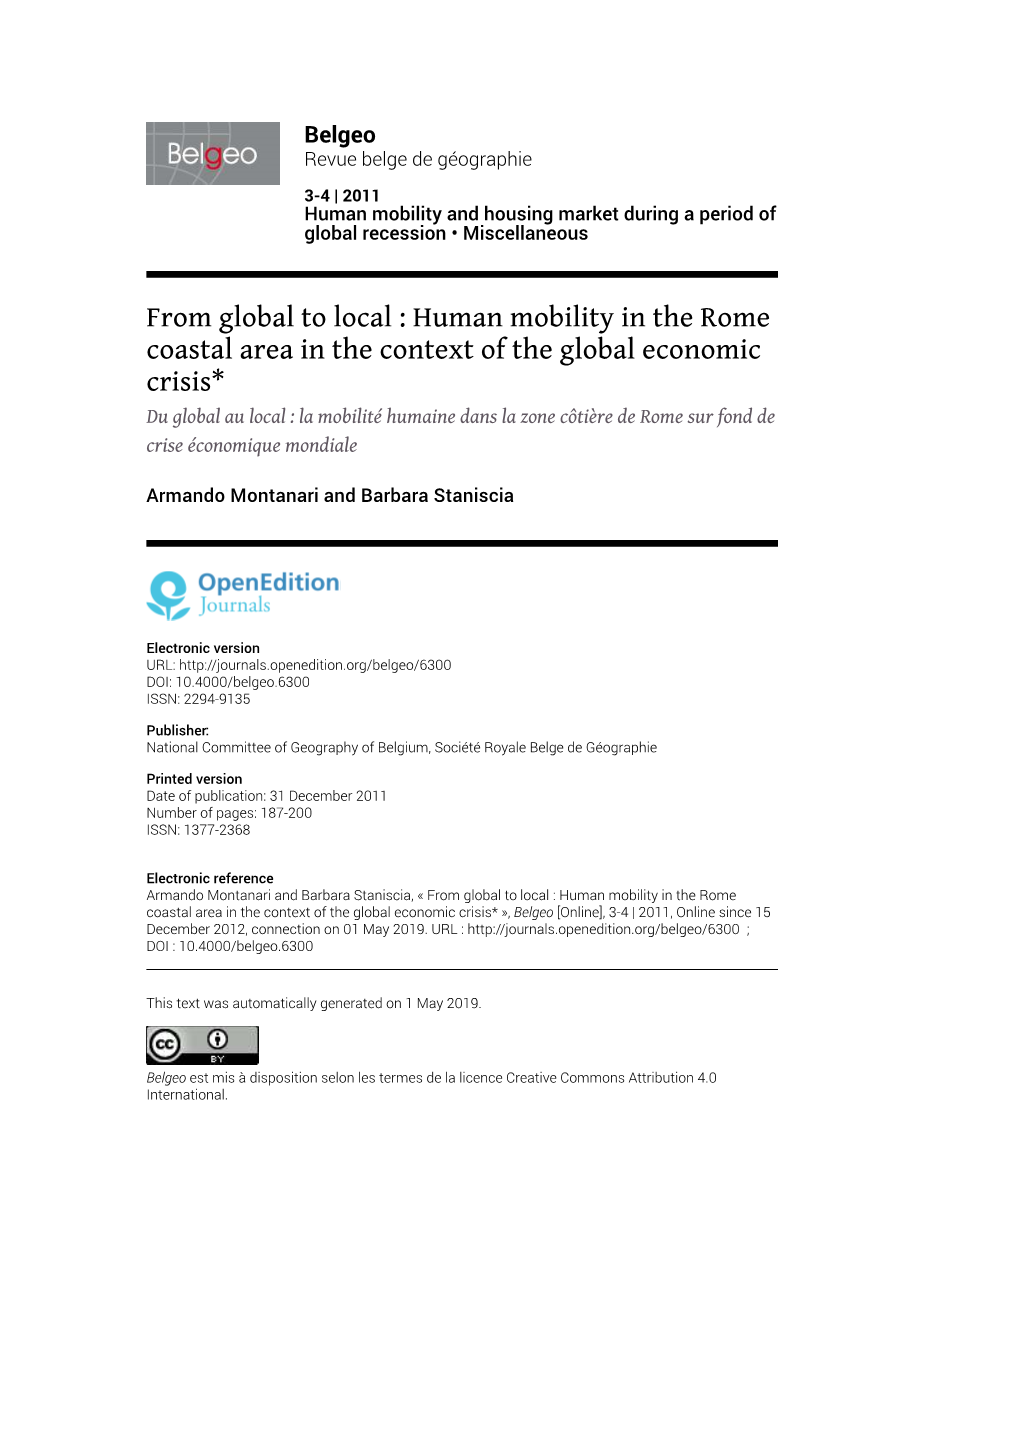 From Global to Local : Human Mobility in the Rome Coastal Area in The